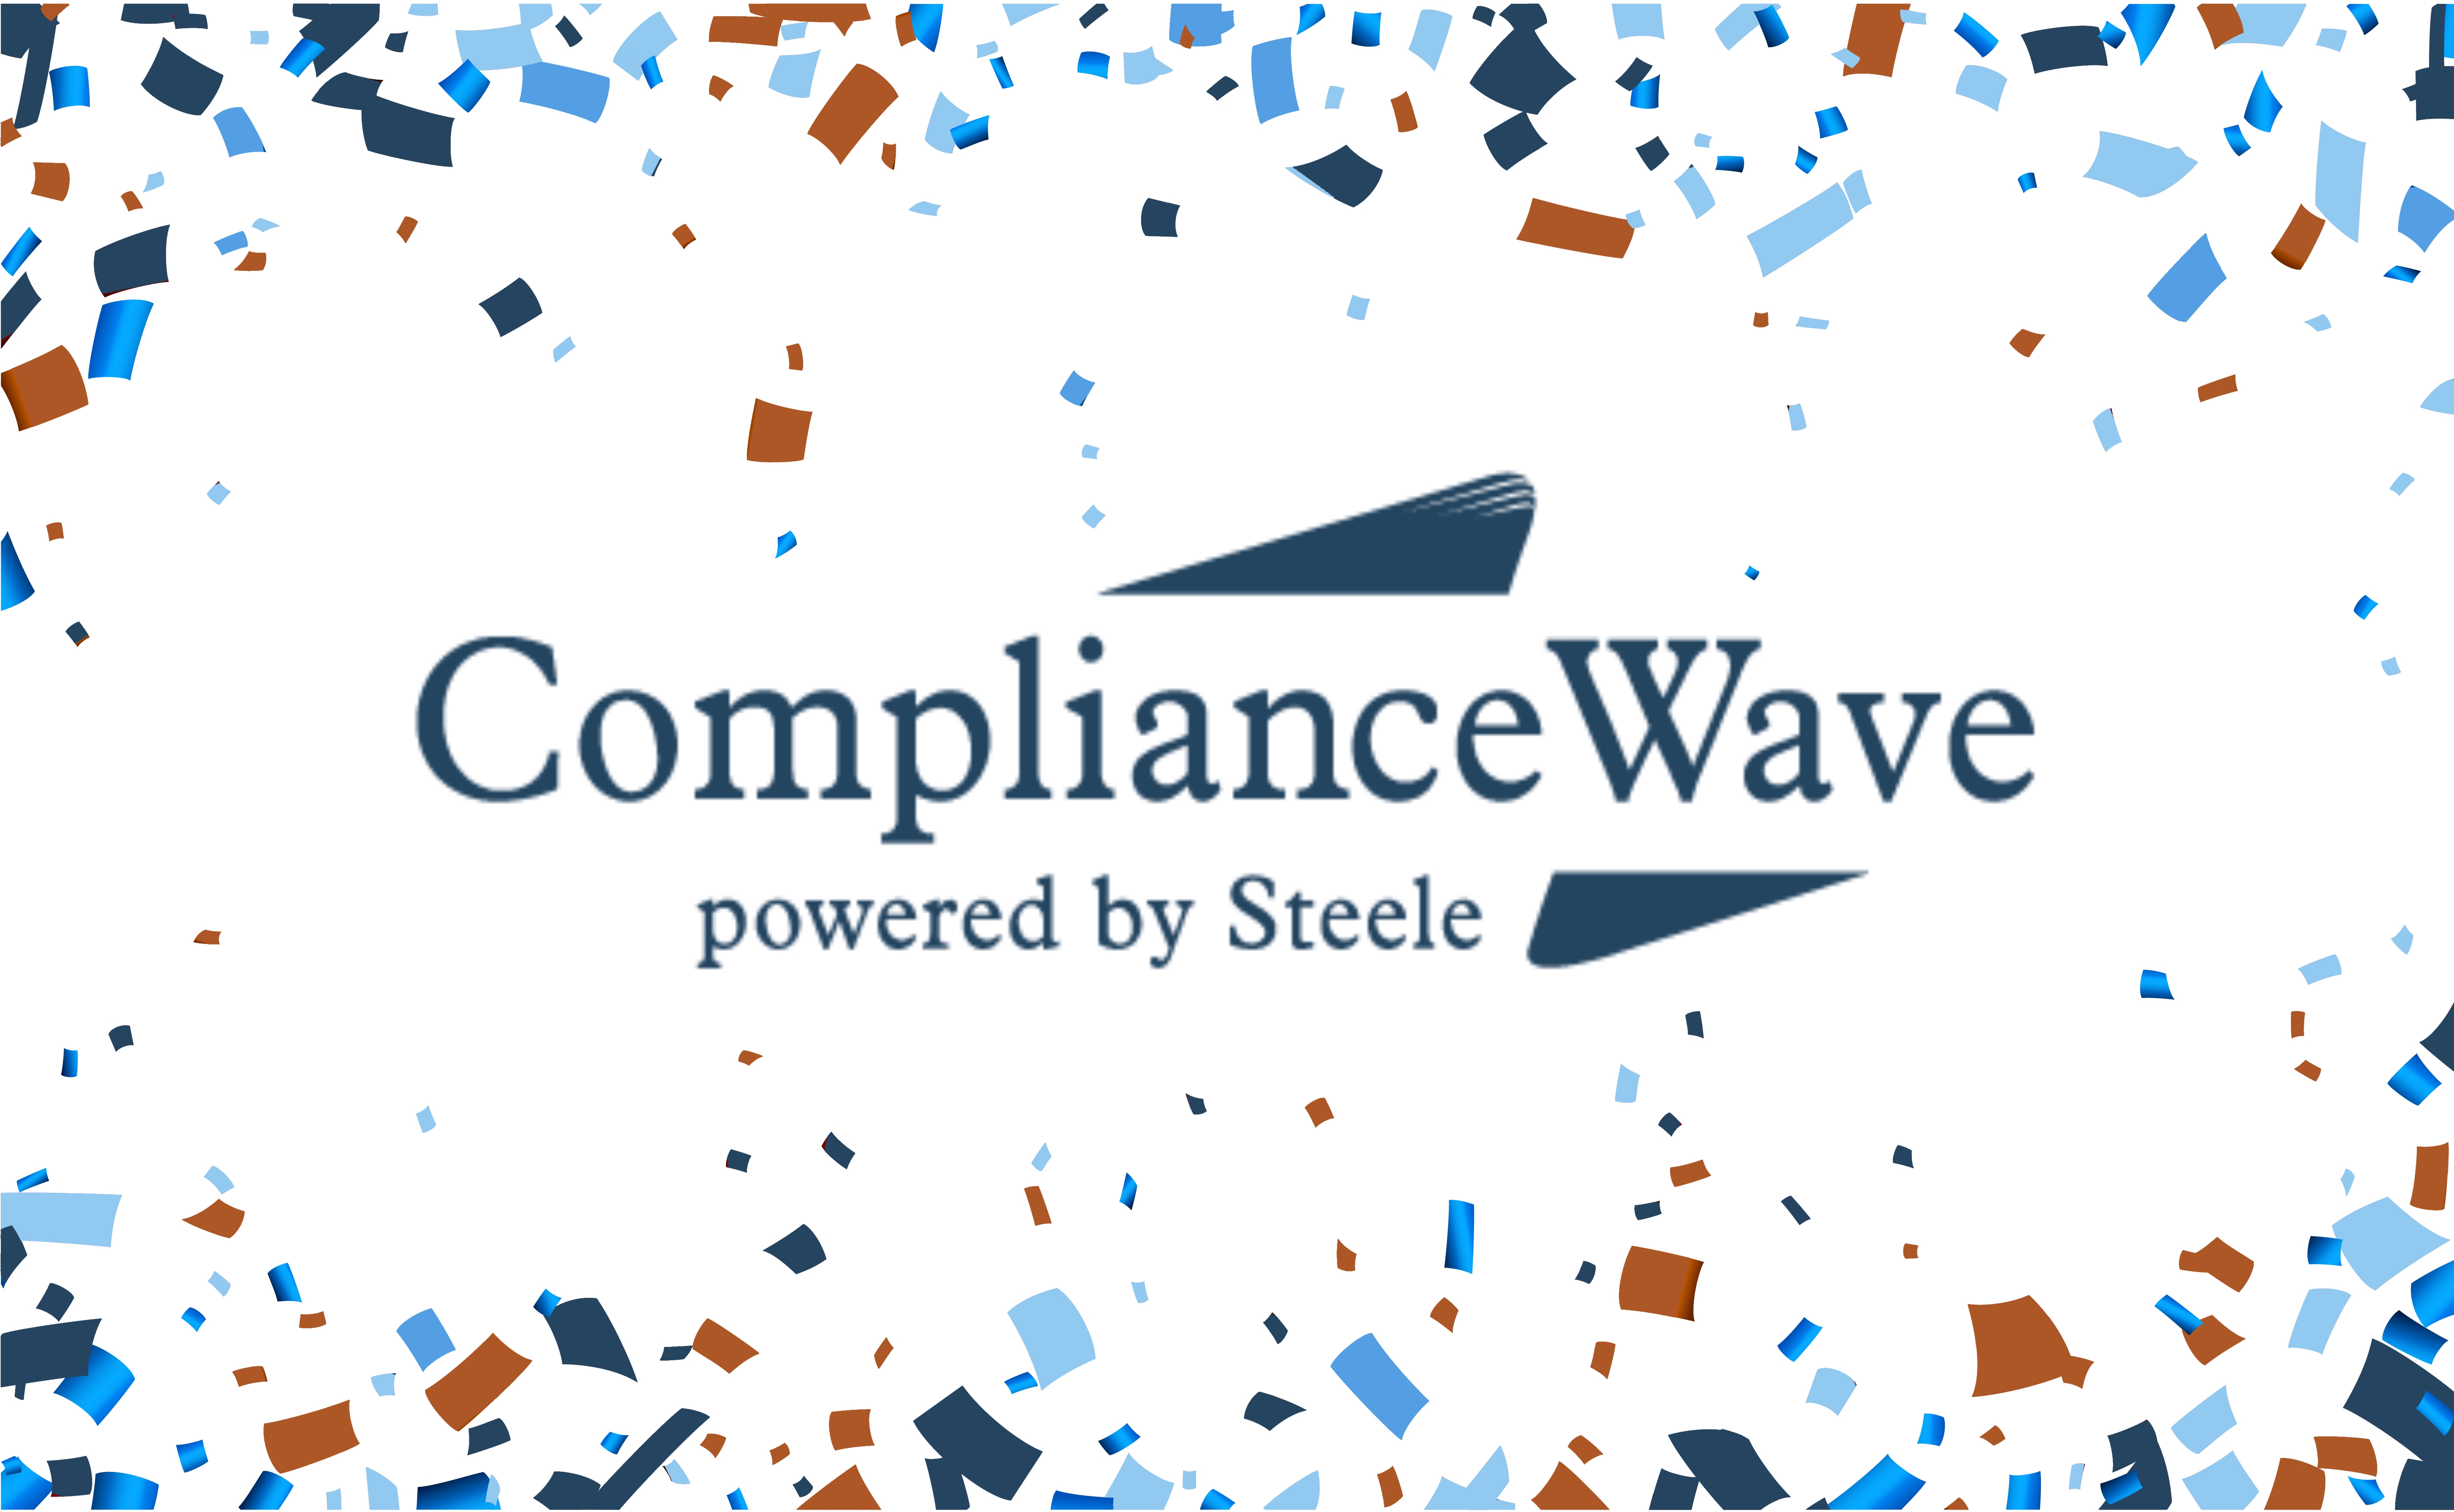 Compliance Wave Expands Their Microleaning Libraries for 2020